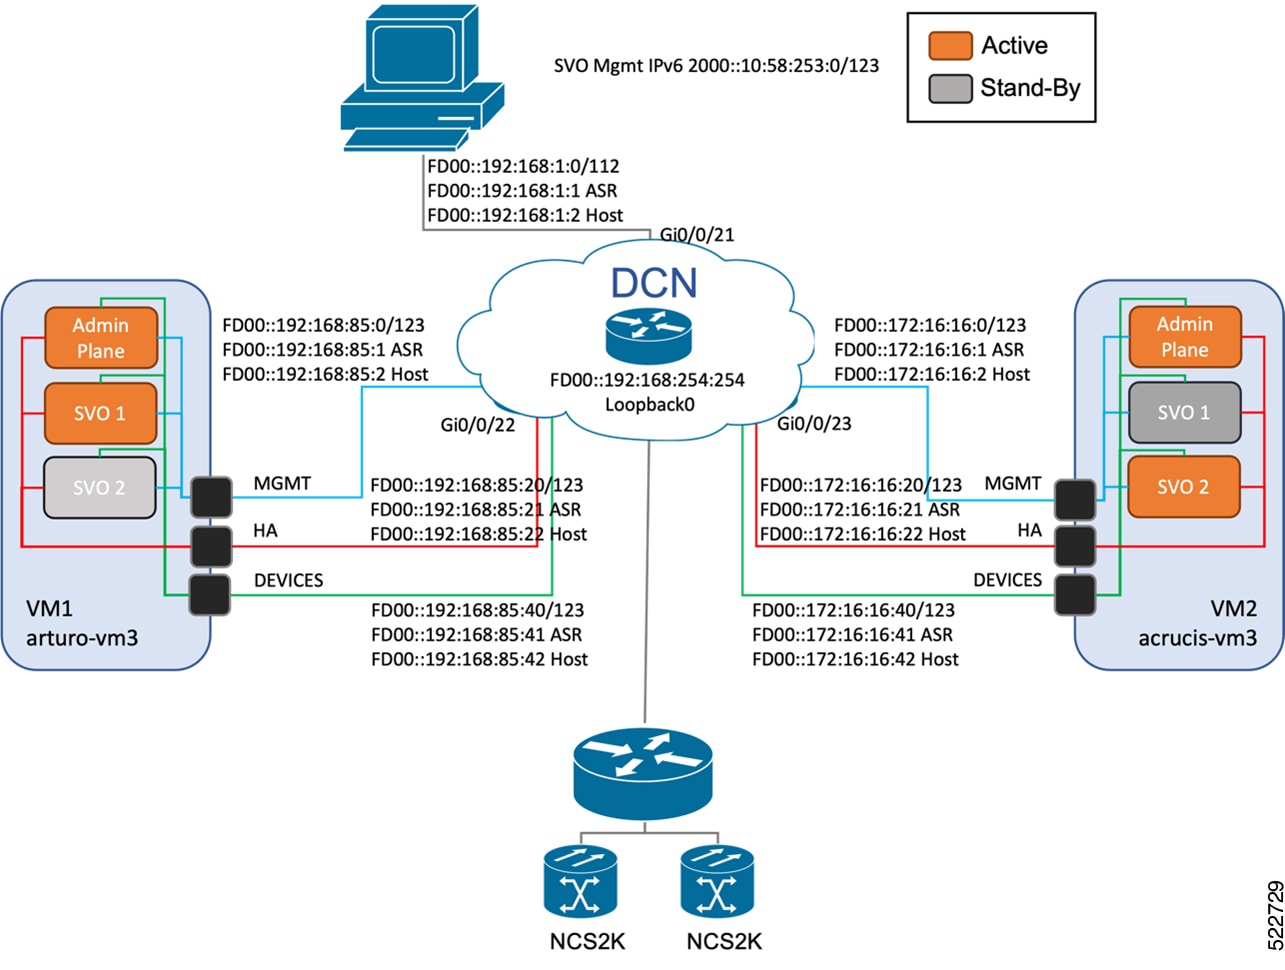 The image shows the management interconnection at Layer 3 between the two IPv6-configured servers or VMs.